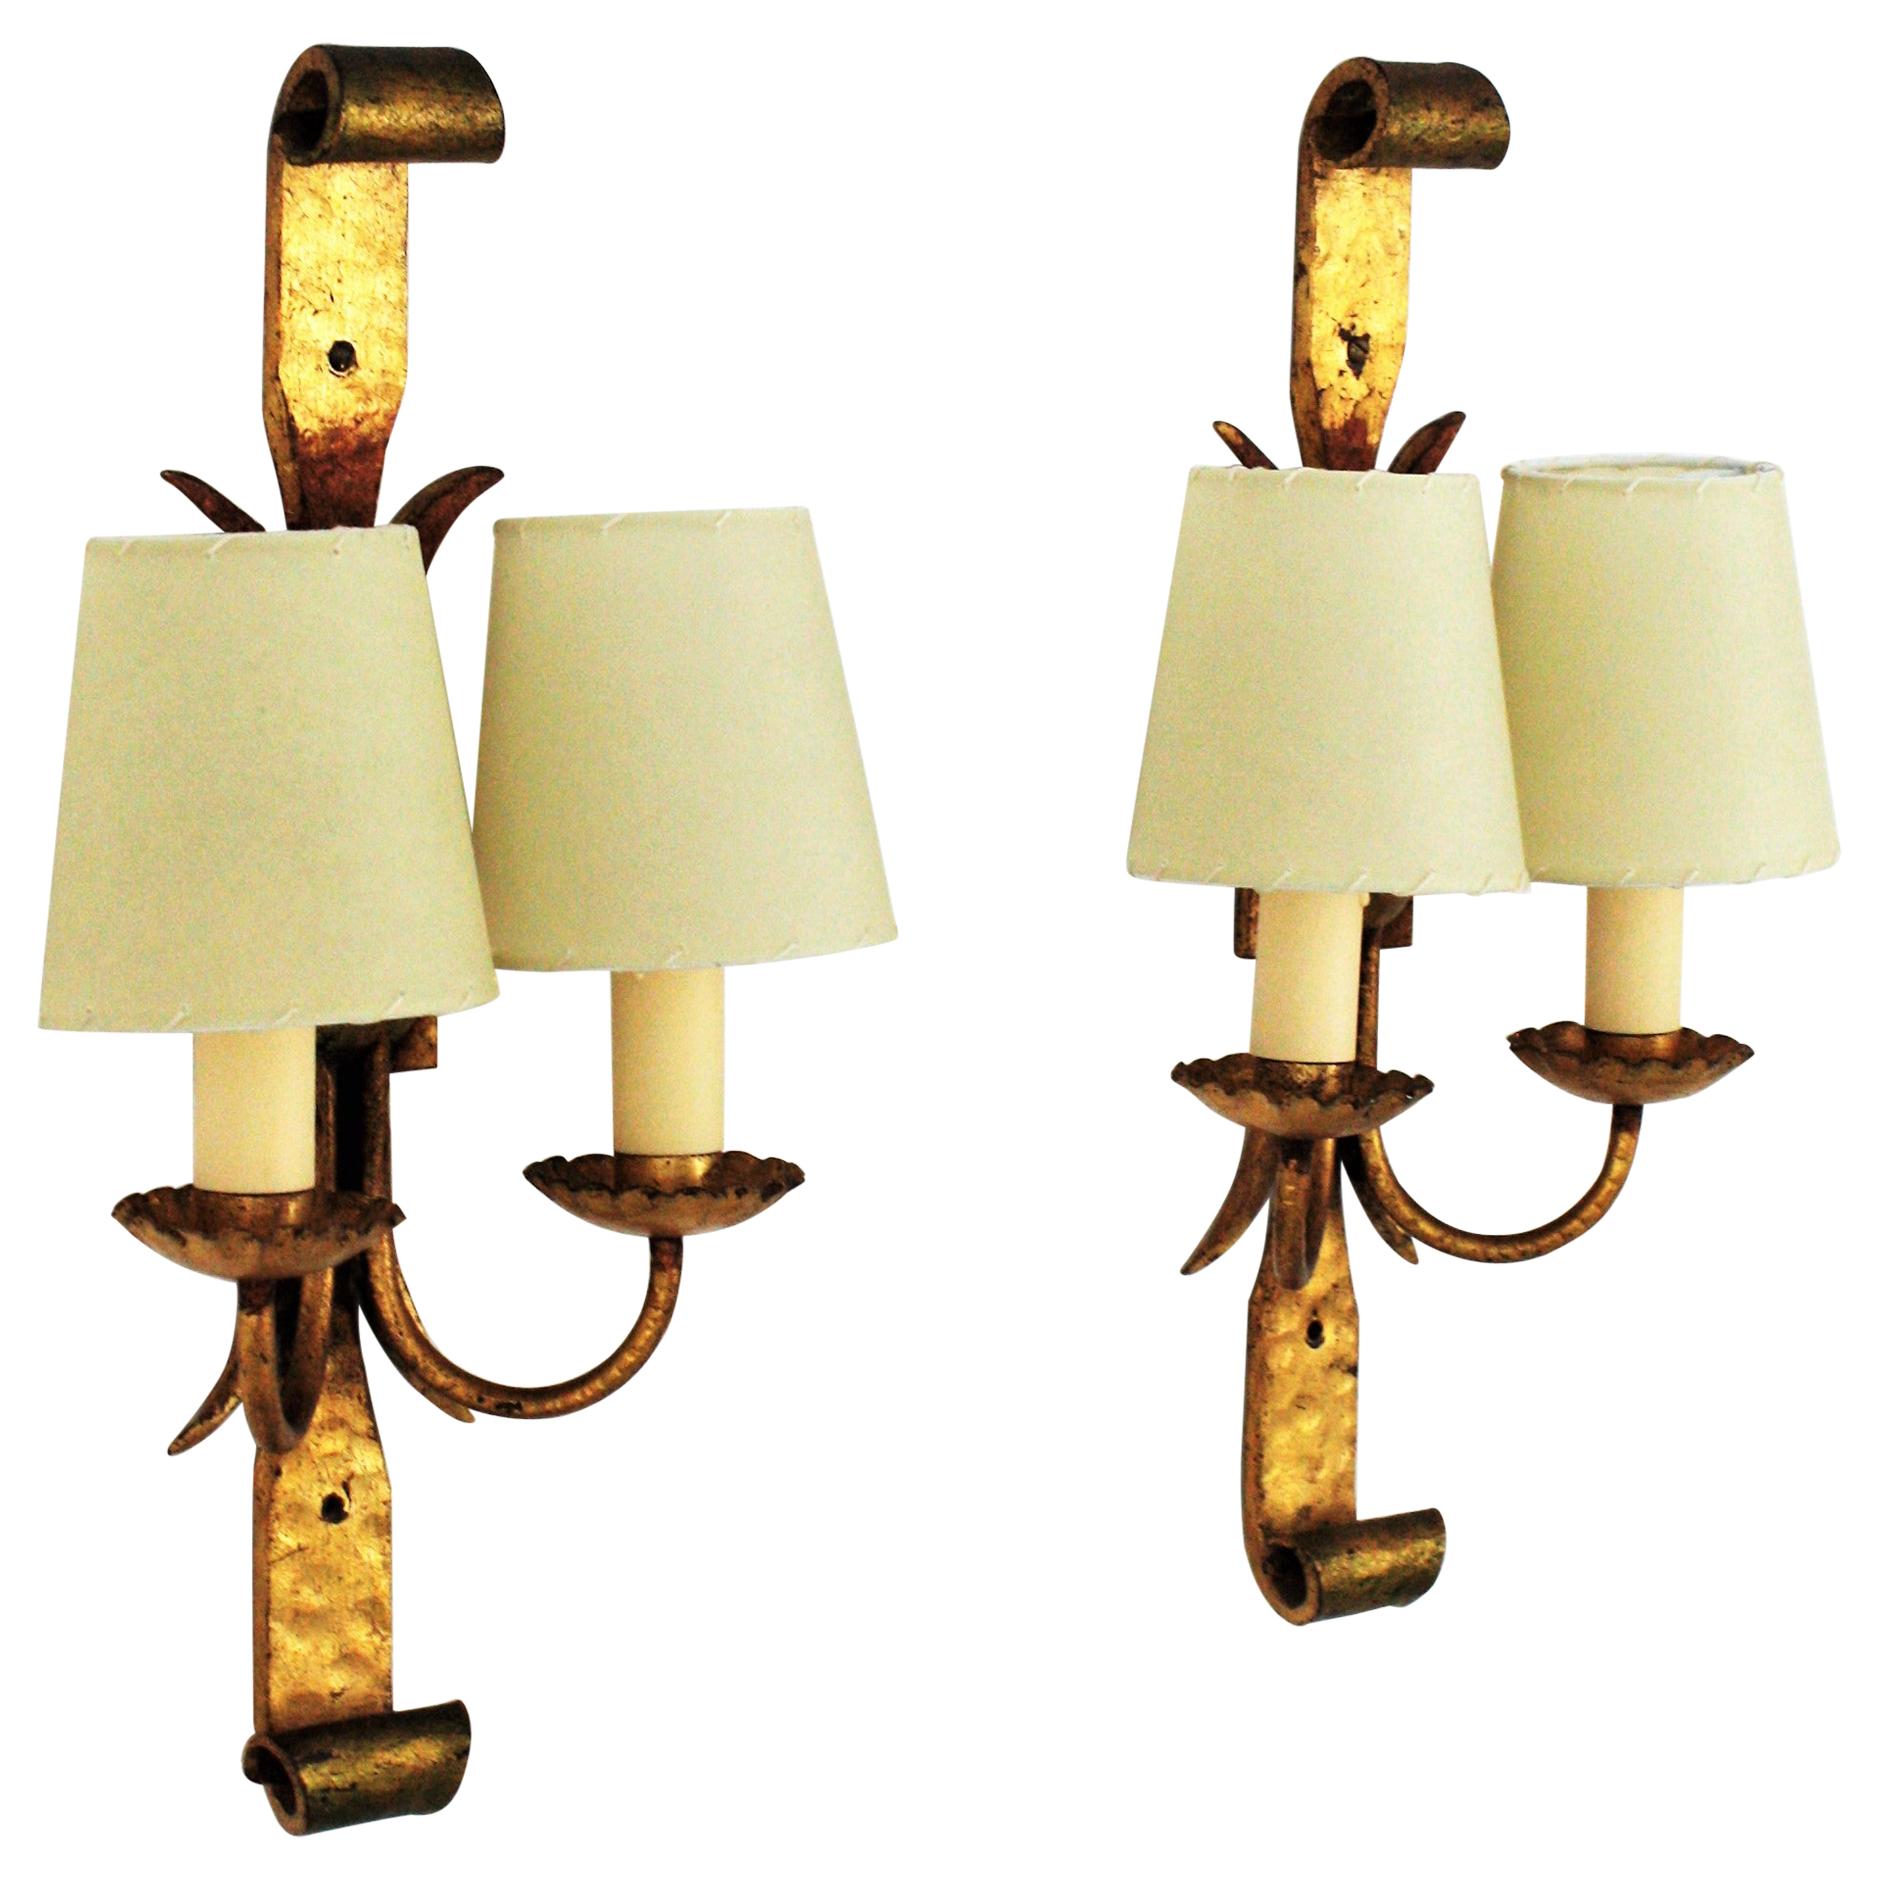 Pair of Spanish Revival Wall Sconces in Gilt Wrought Iron